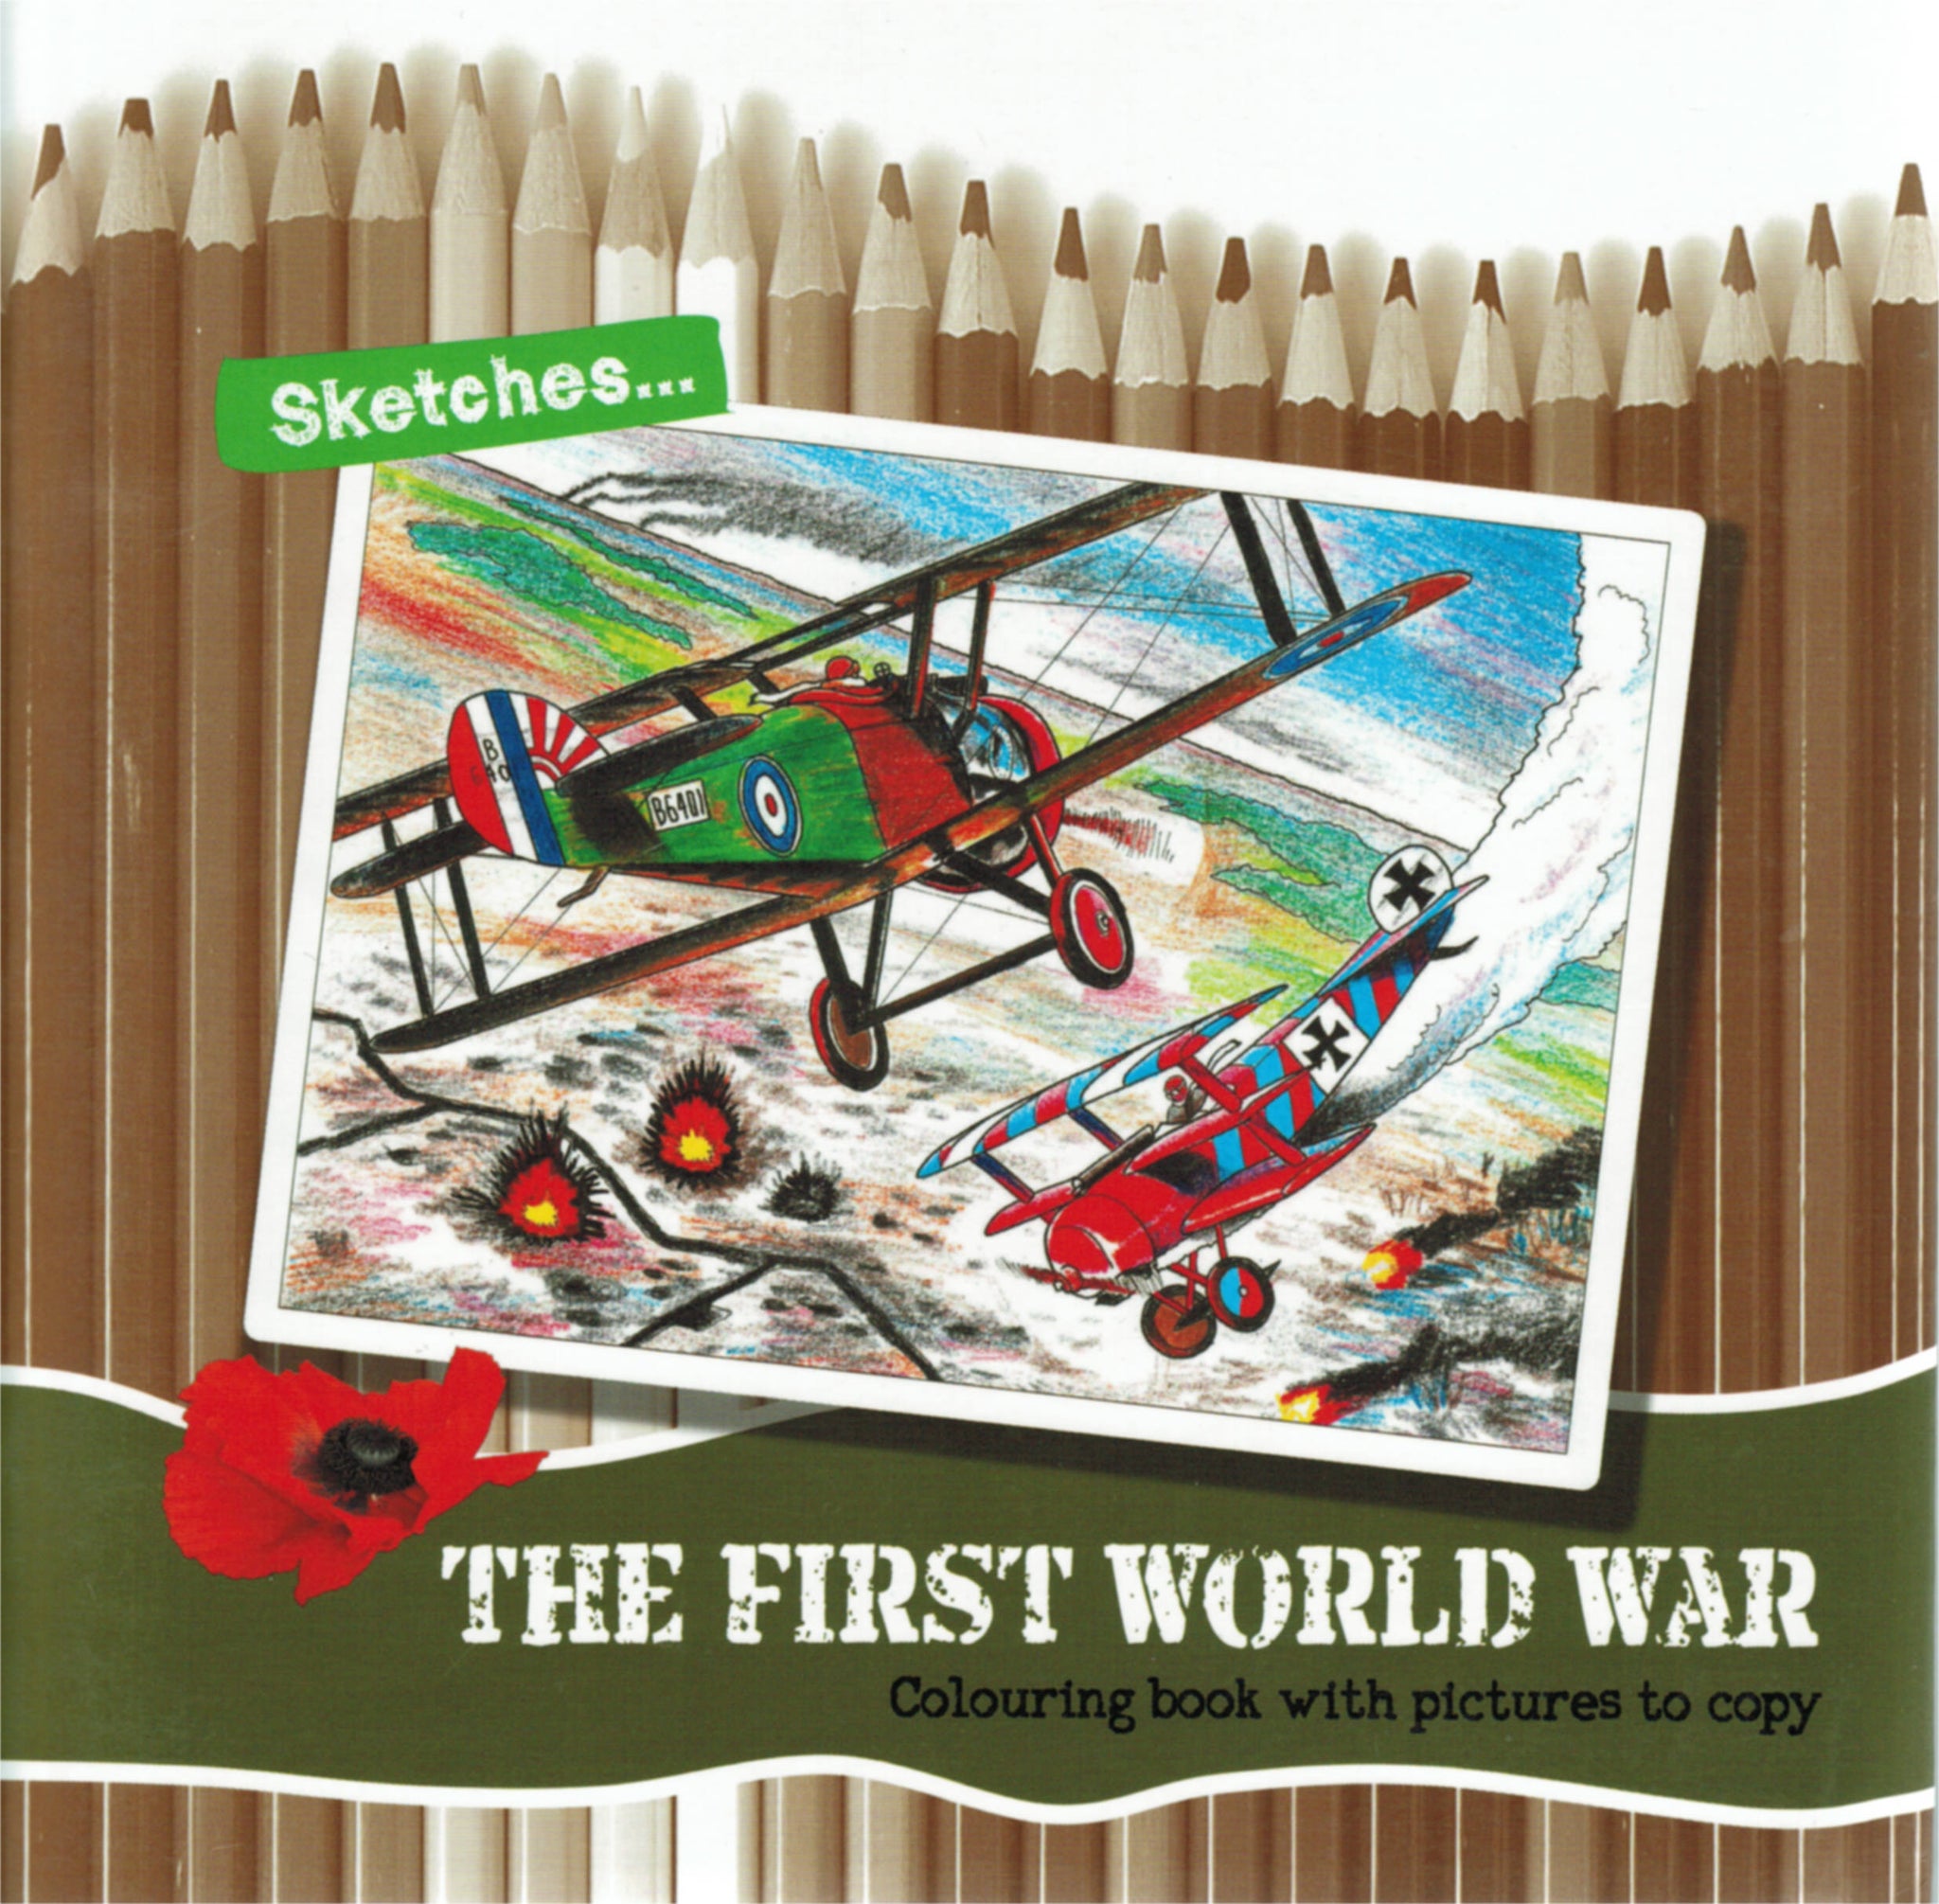 Sketches... The First World War: Colouring book with pictures to colour